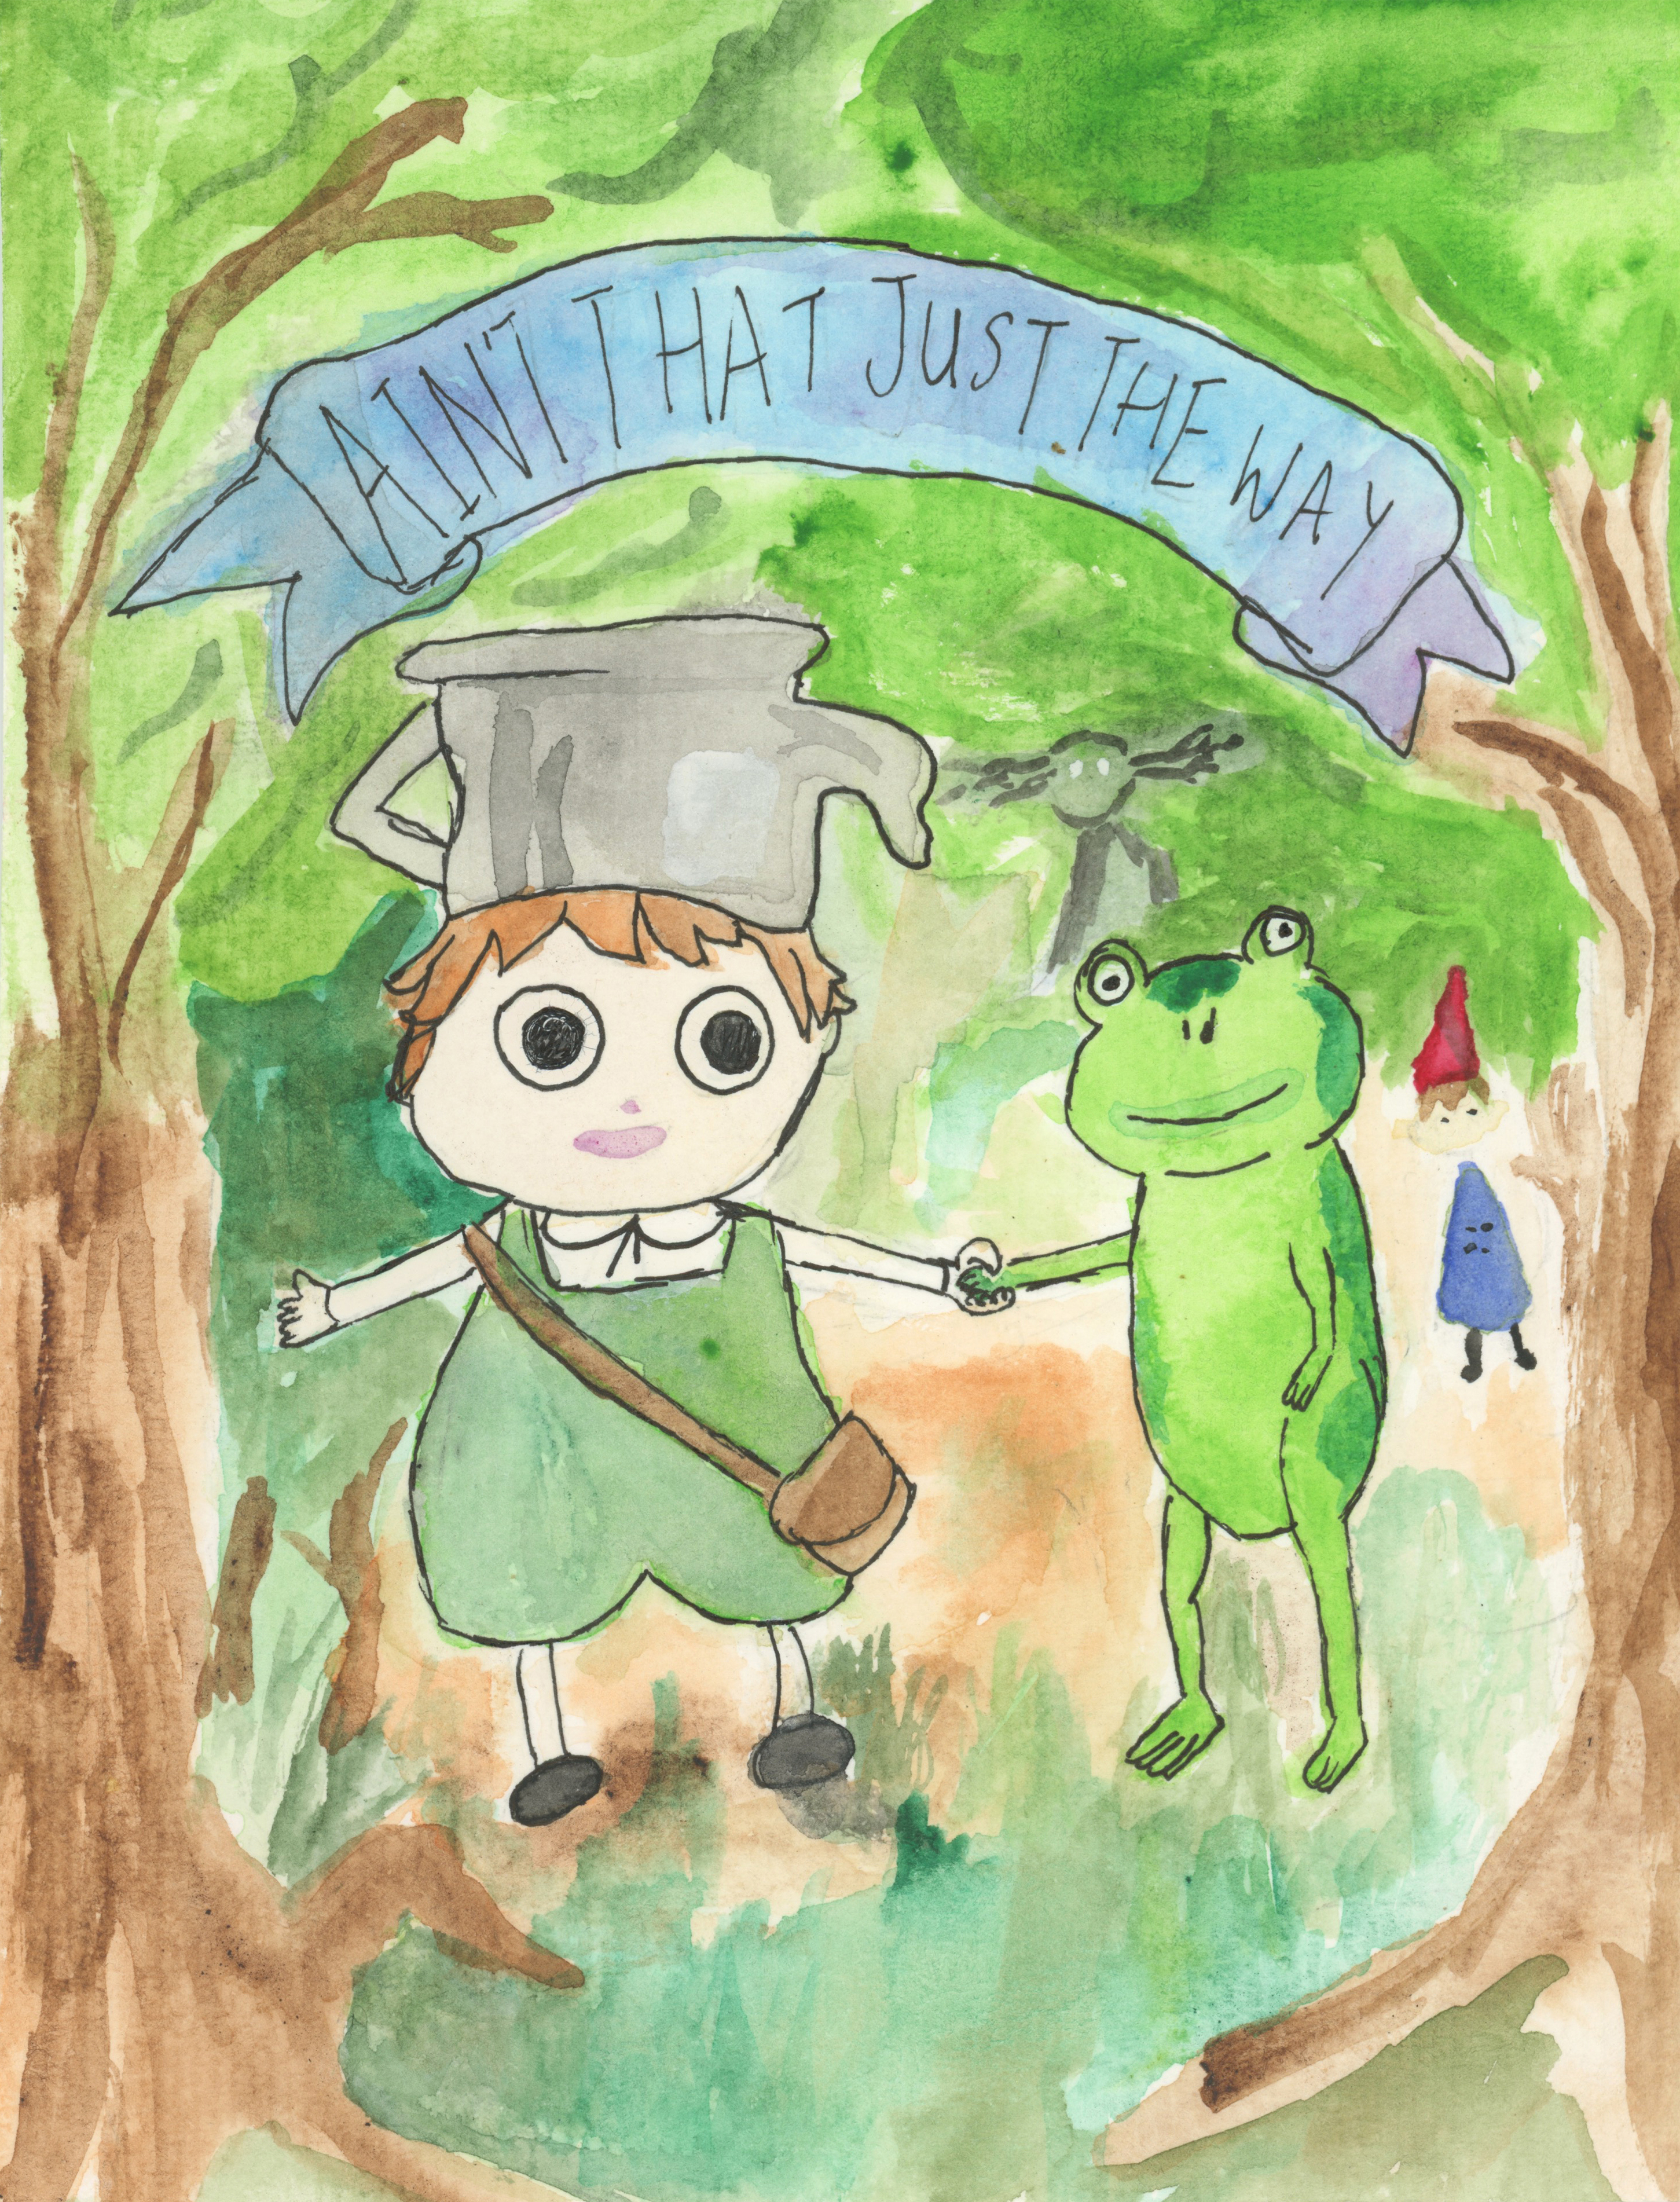 watercolor of characters from over the garden wall with the text 'aint't that just the way'